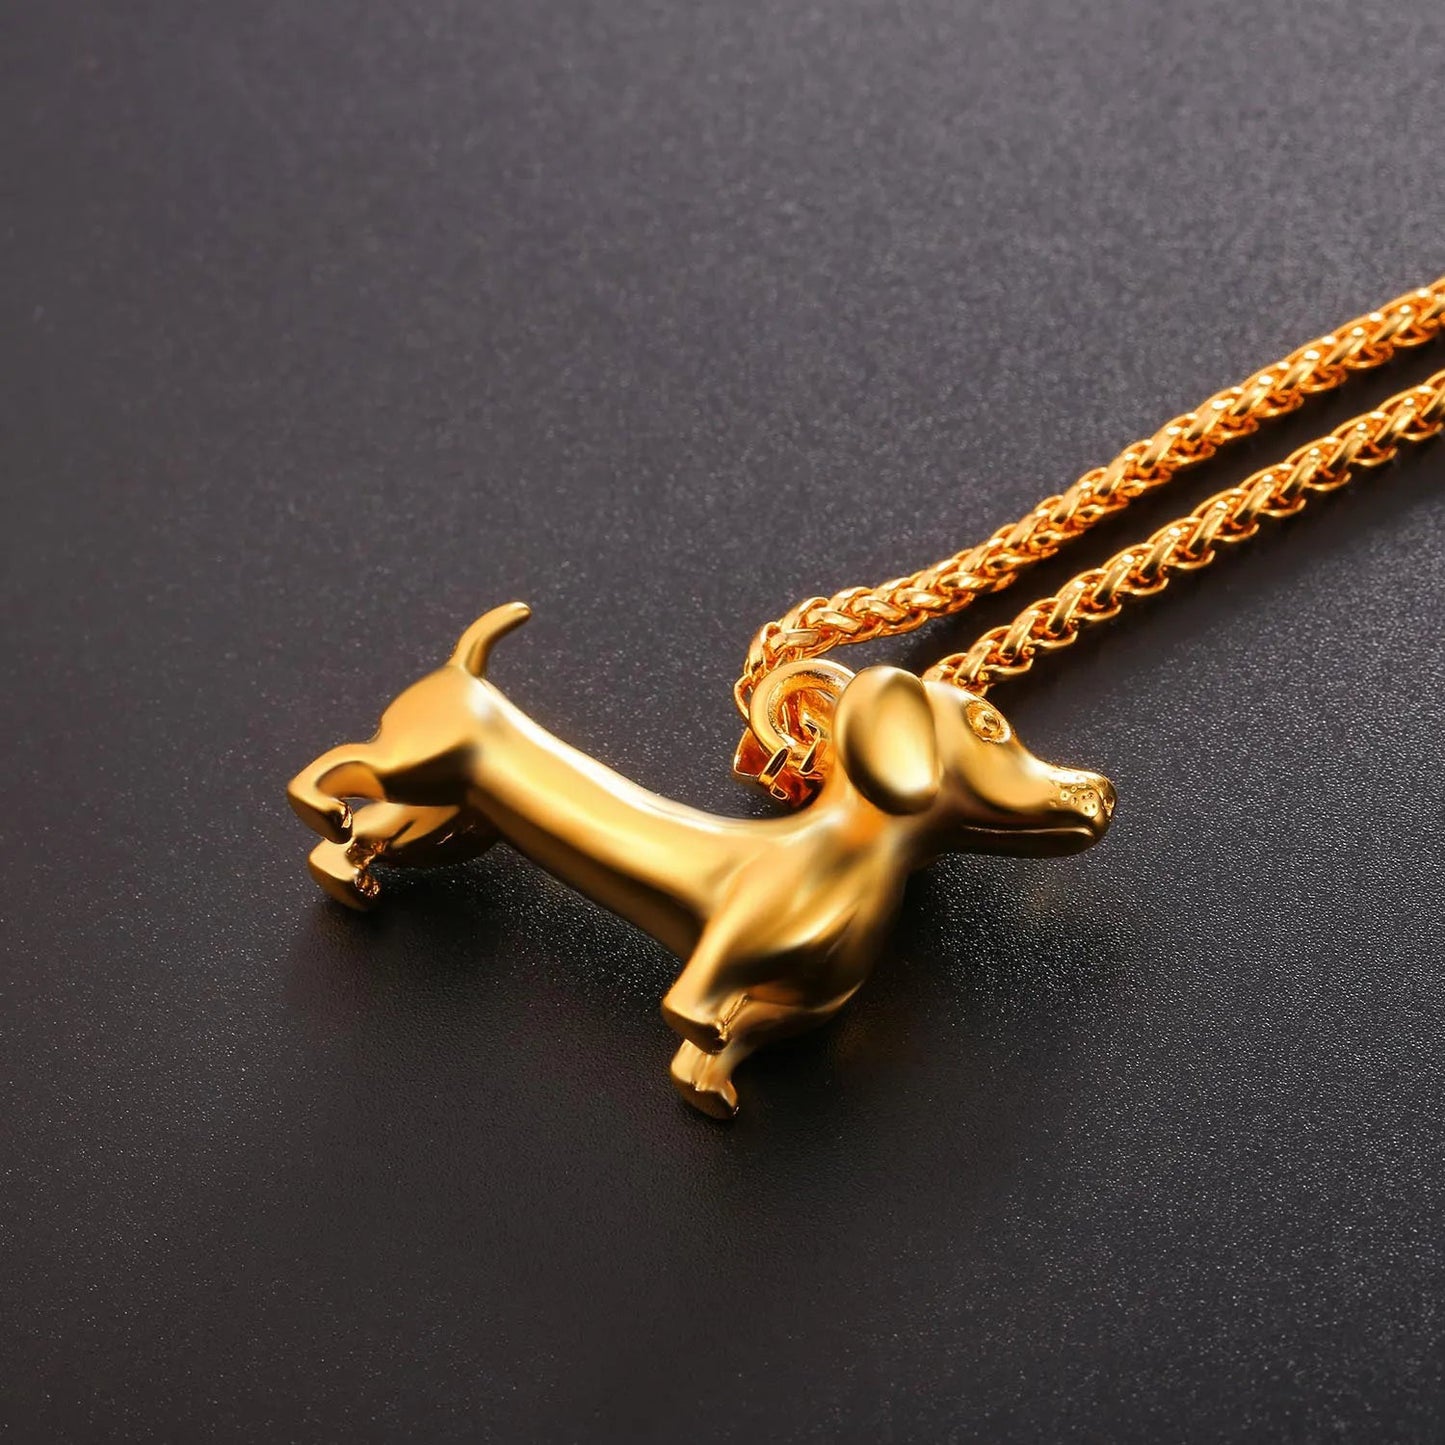 Stainless Steel 3D Dachshund Necklace | The Best Dachshund Gifts